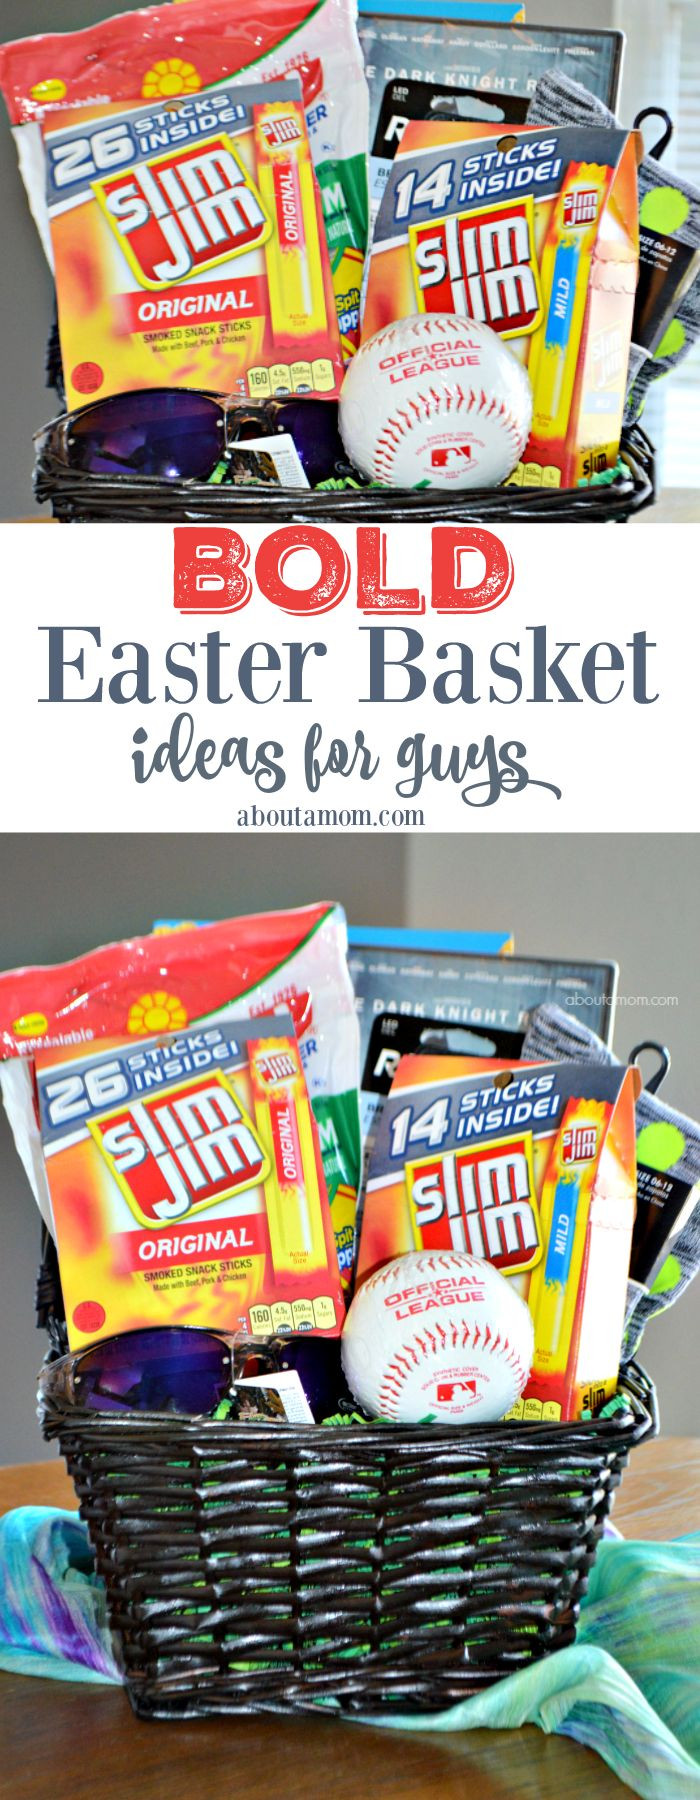 Easter Gift Ideas For Boys
 25 best ideas about Easter baskets on Pinterest